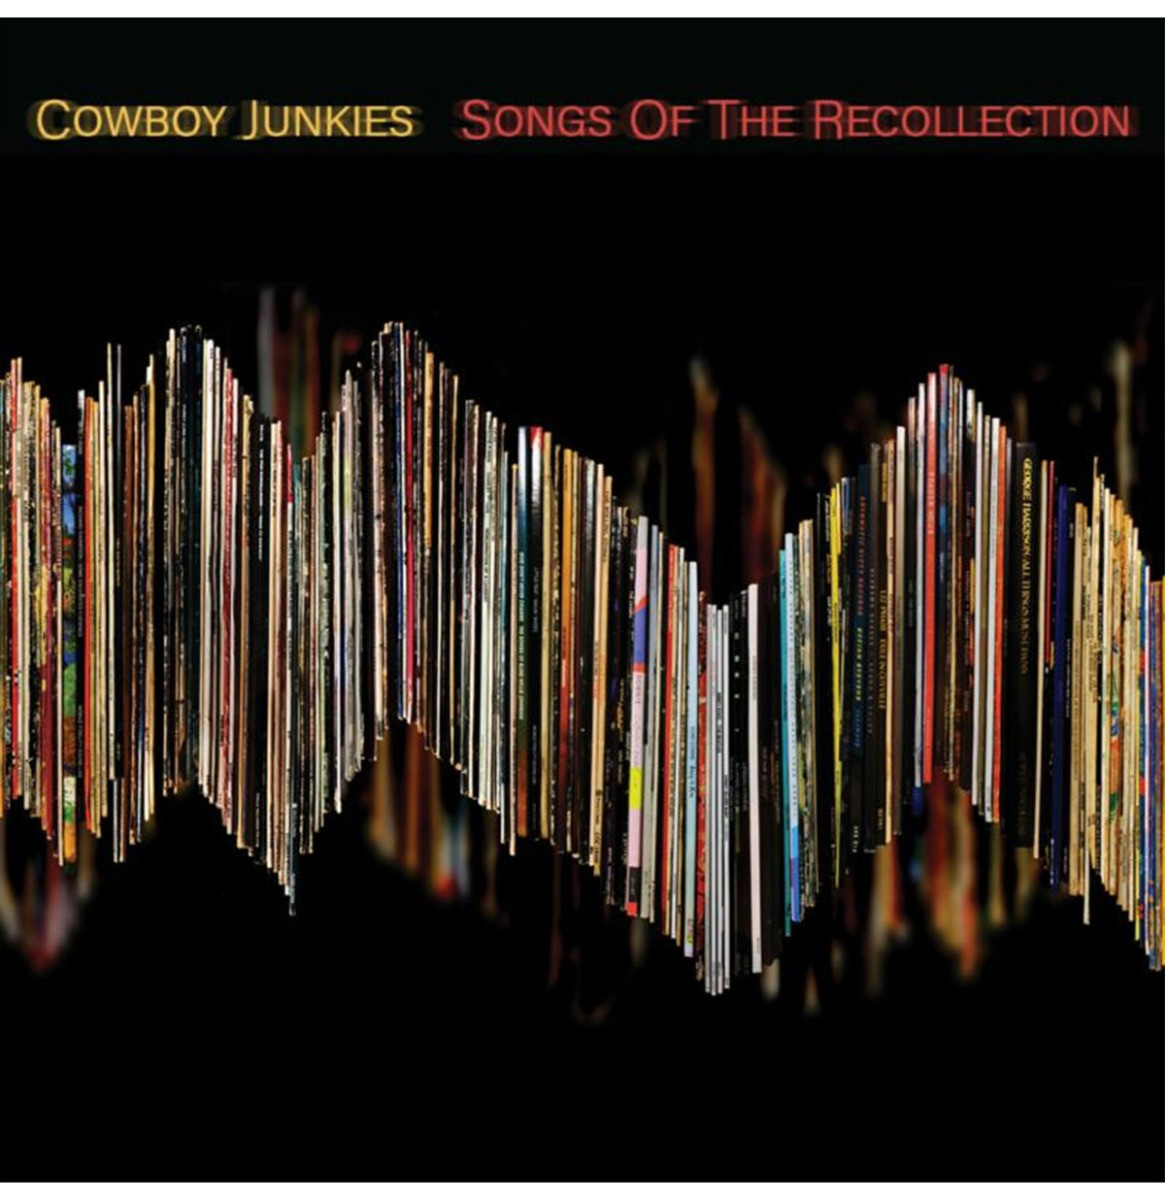 Cowboy Junkies - Songs Of The Recollection LP